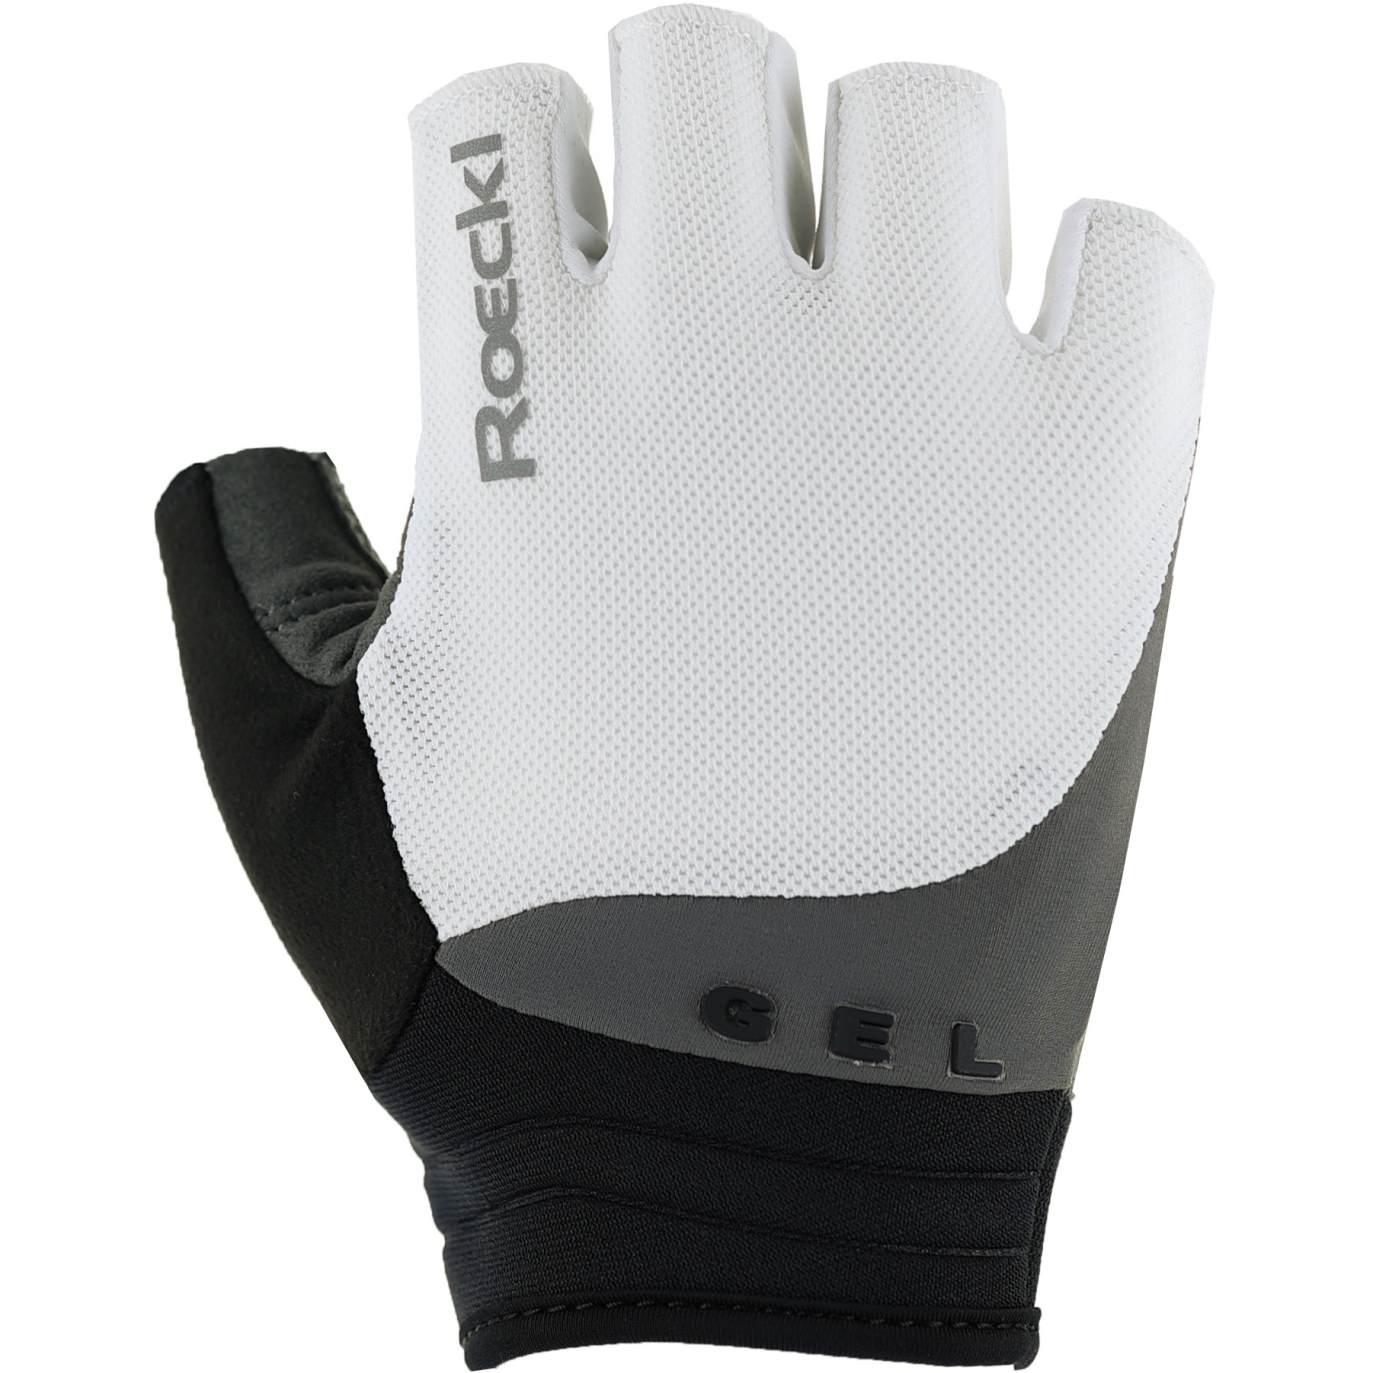 Picture of Roeckl Sports Itamos 2 Cycling Gloves - white/smoked pearl 1087